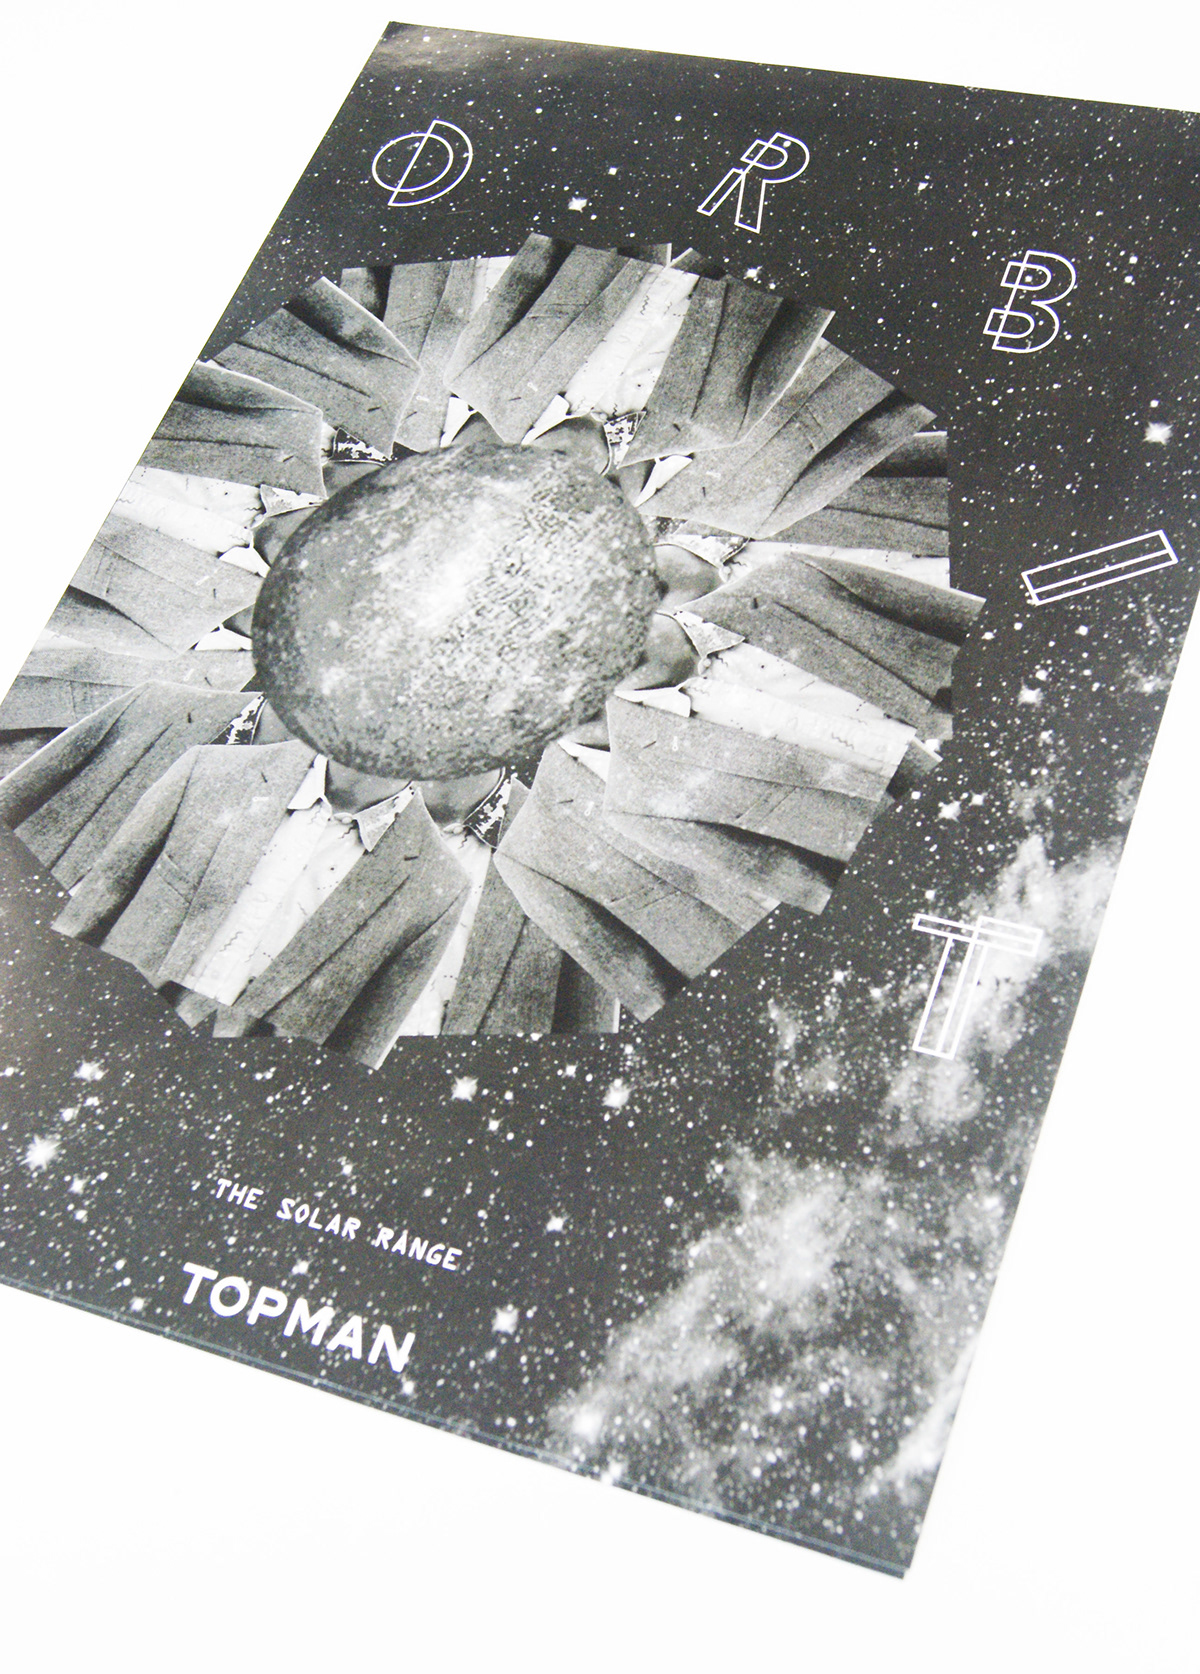 topman branding  Collection Fashion  welcome collection science solar system Astrology Planets Orbit Lookbook Advertising  Promotion posters